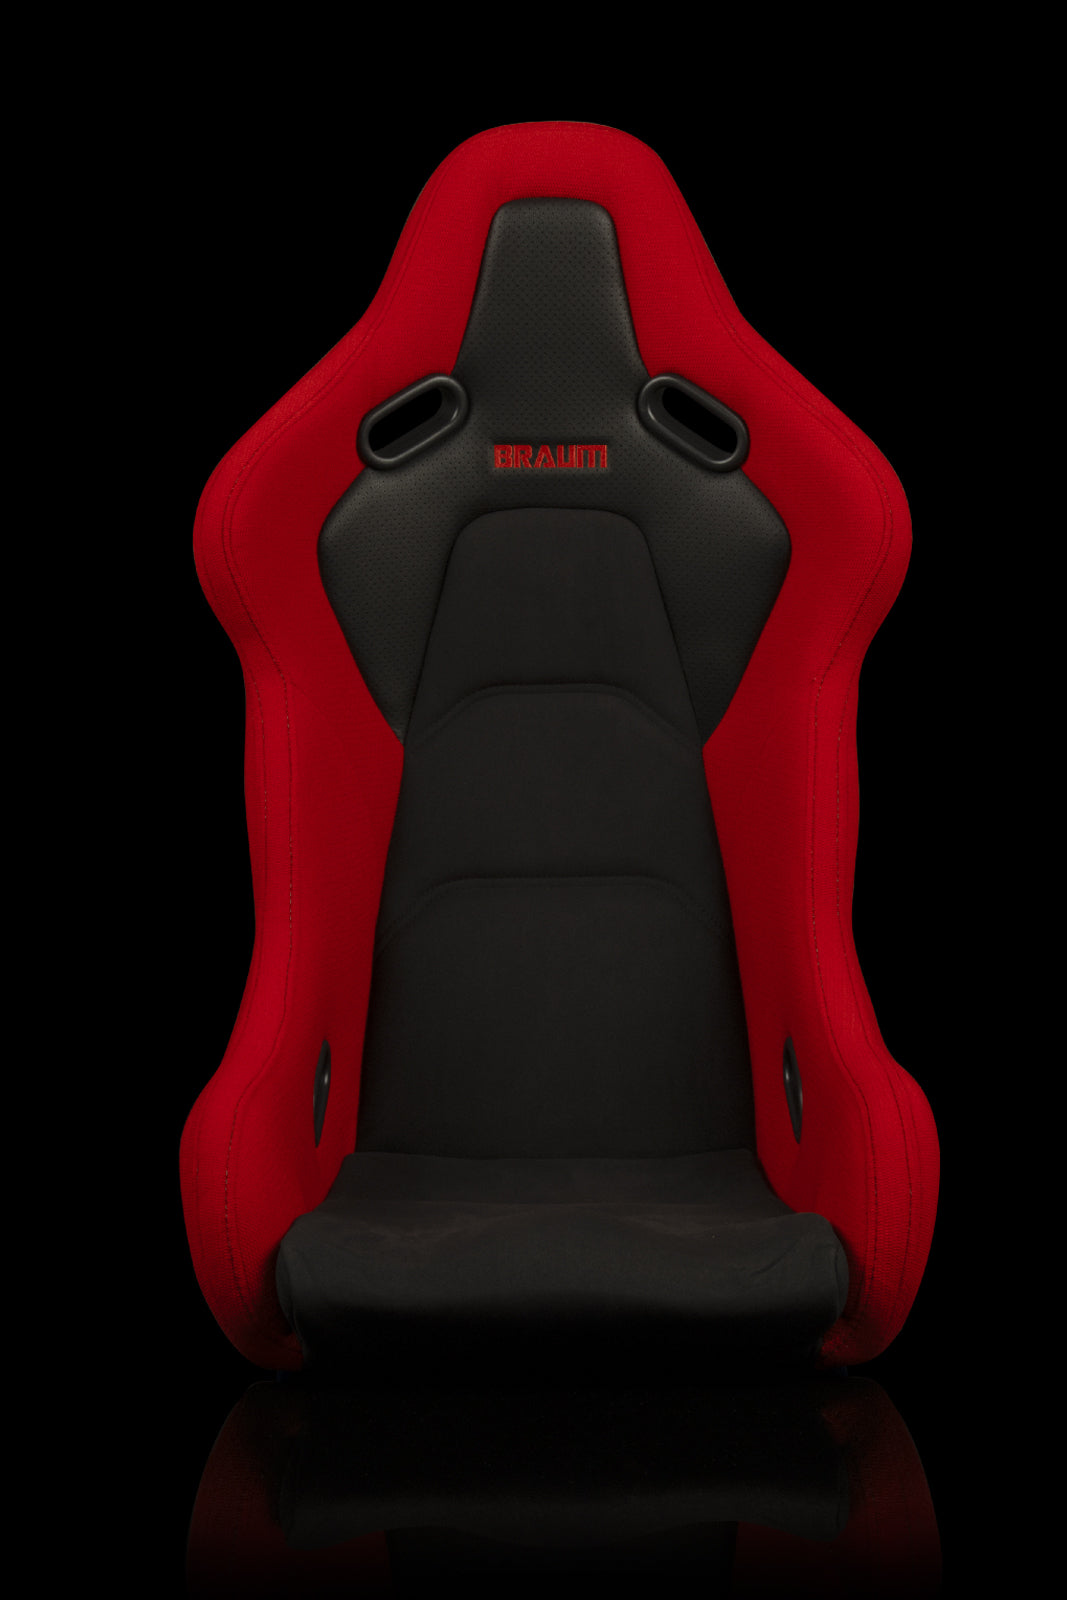 Braum Racing Falcon-S FIXED BACK BUCKET COMPOSITE SEAT (White/Red Stitching)